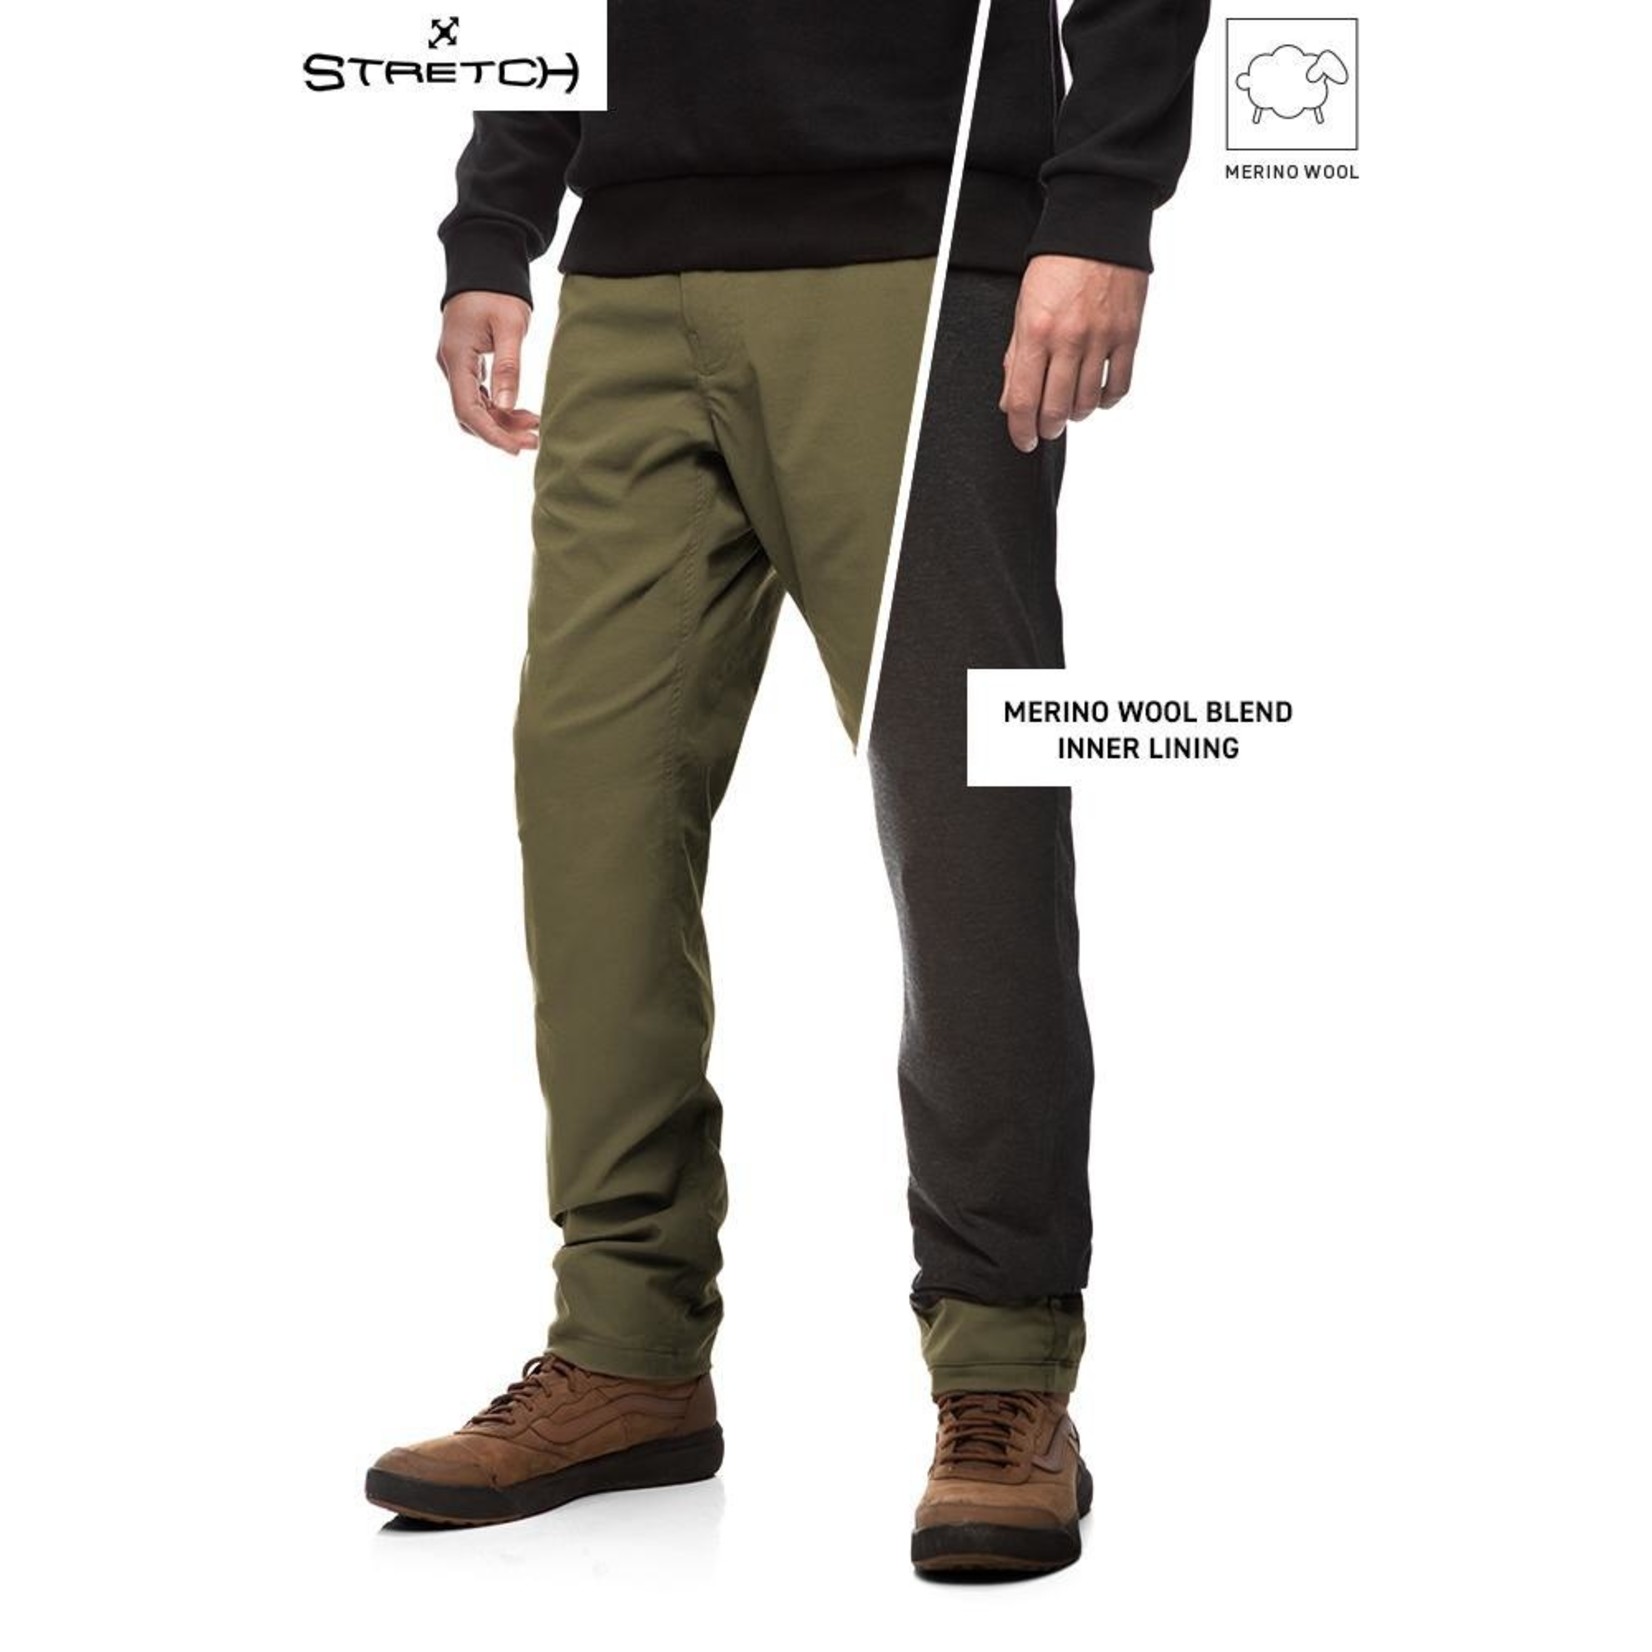 686 686 Men's Everywhere Merino Lined Pant - Relaxed Fit